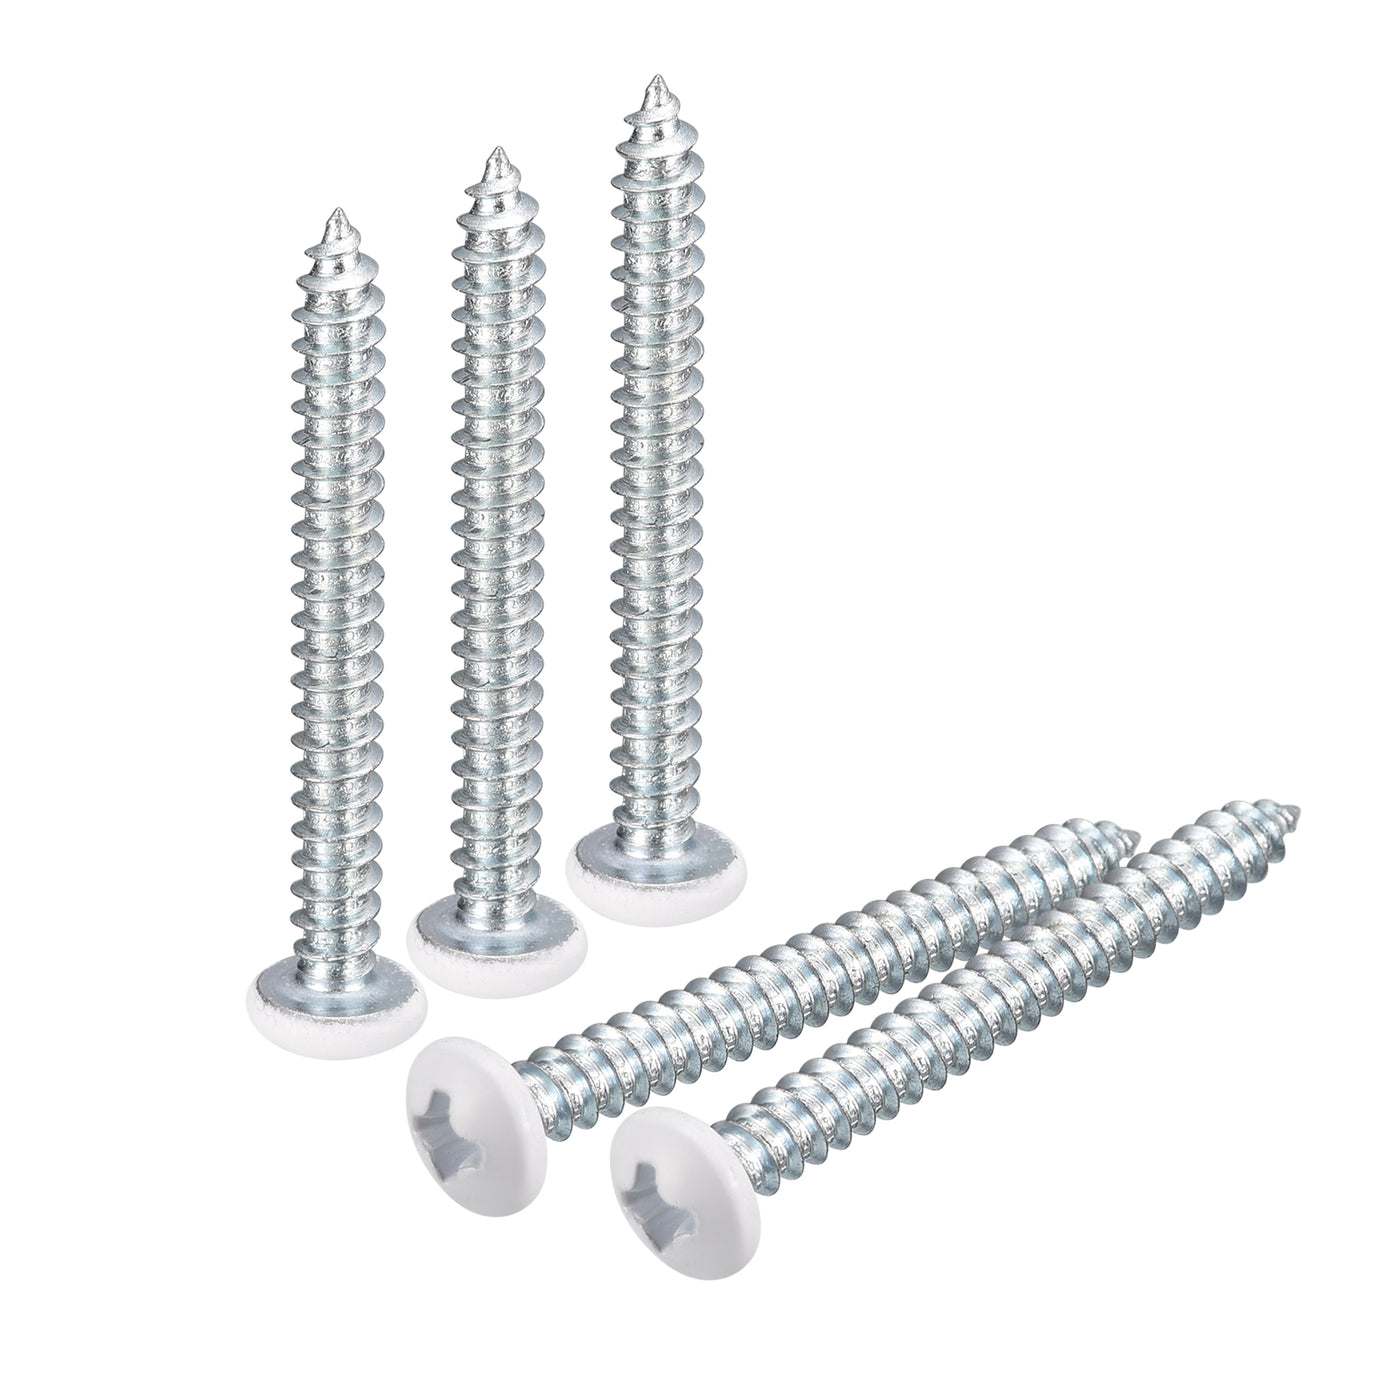 uxcell Uxcell ST4x40mm White Screws Self Tapping Screws, 50pcs Pan Head Phillips Screws